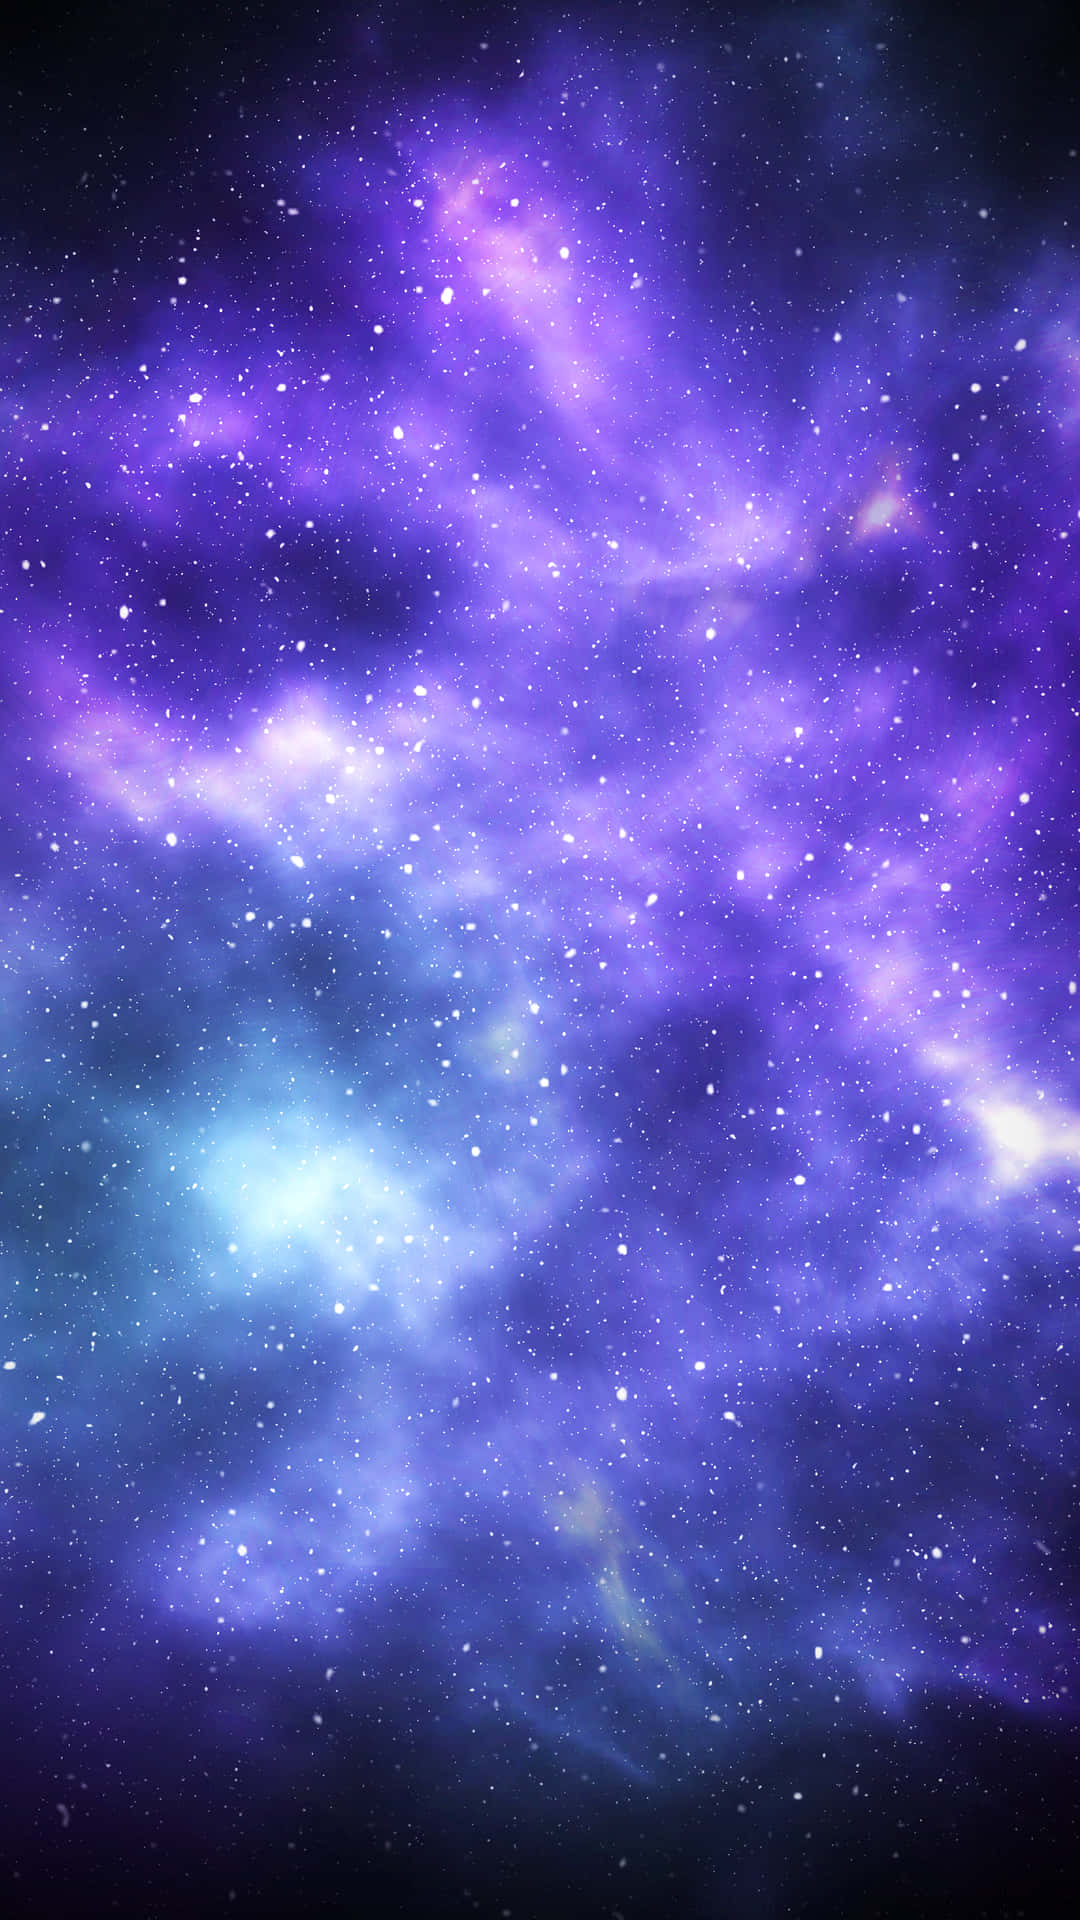 Get lost in your world with the beautiful Blue Galaxy Iphone Wallpaper